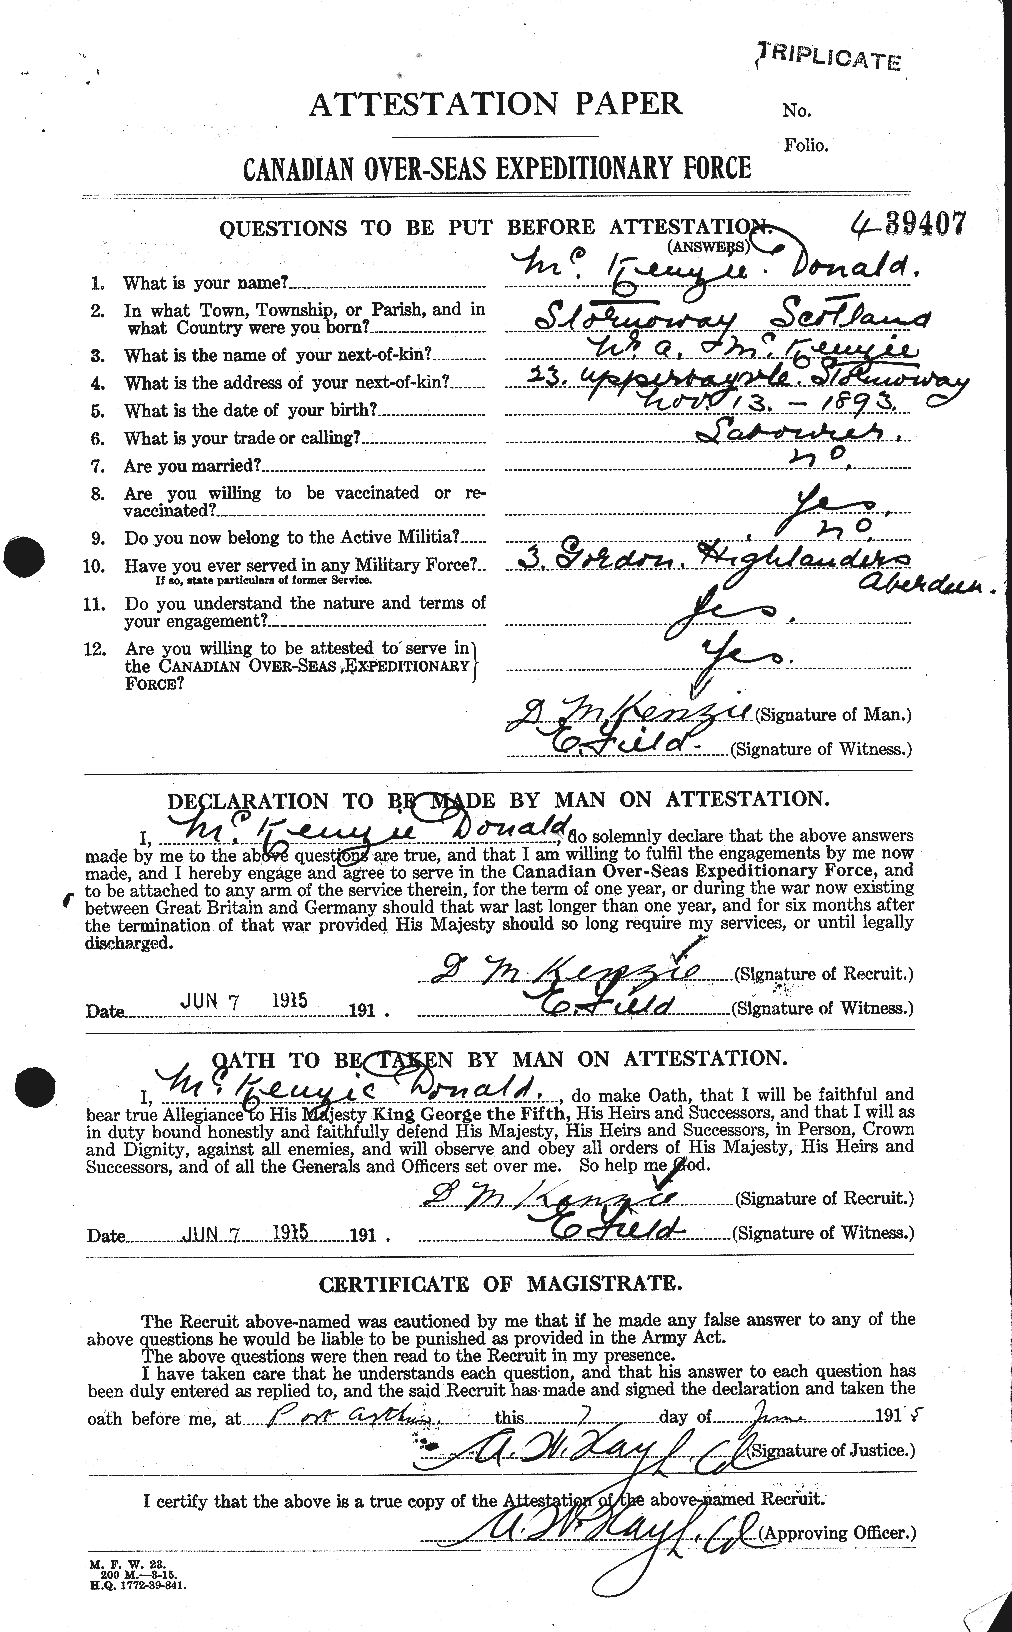 Personnel Records of the First World War - CEF 529041a